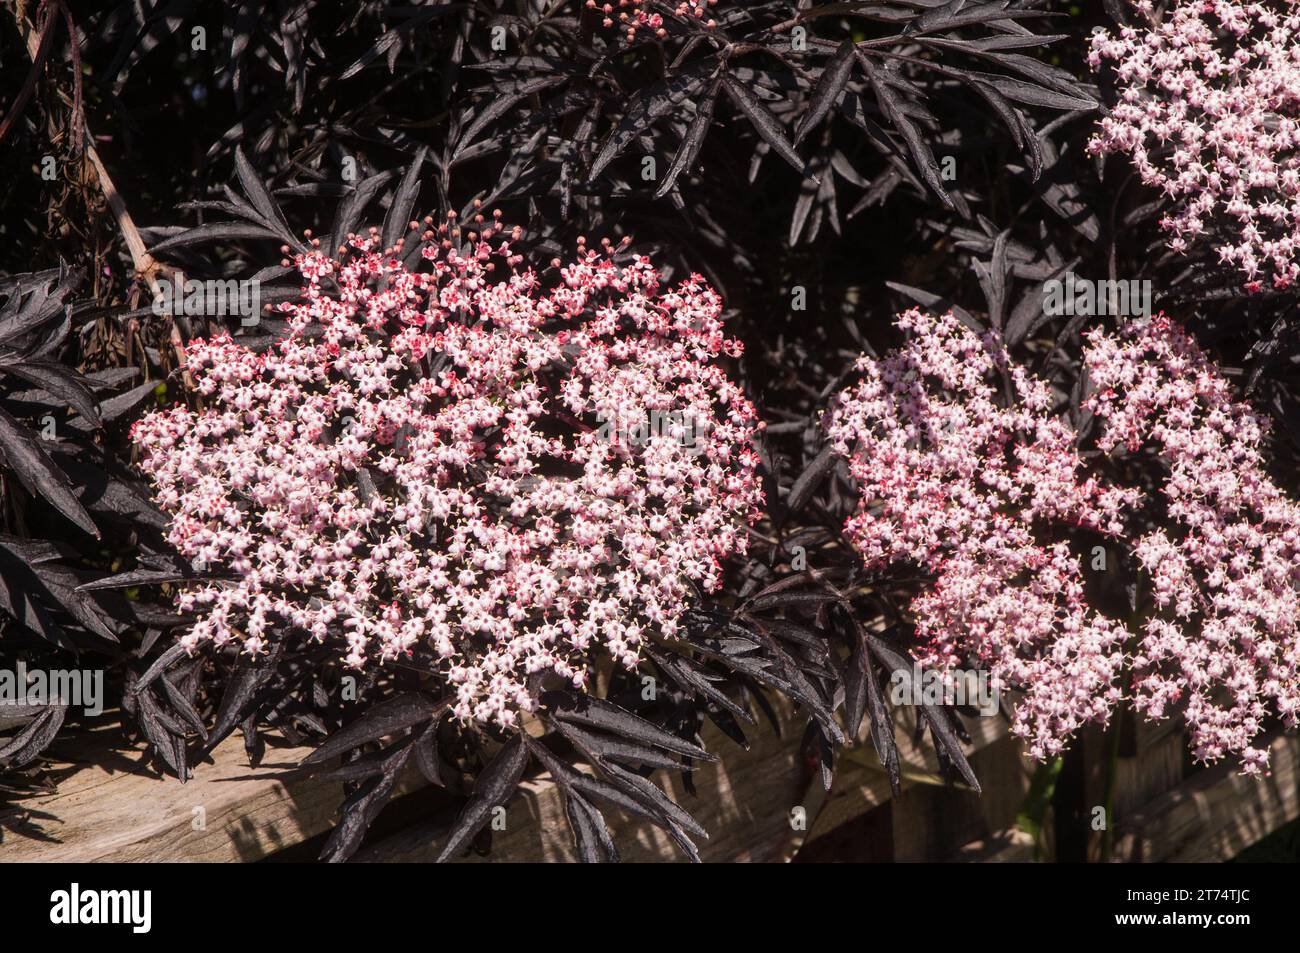 Sambucus nigra  Black Elder  A diciduous bushy shrub or small tree that has black leaves and also black berries in autumn. Is fully hardy. Stock Photo